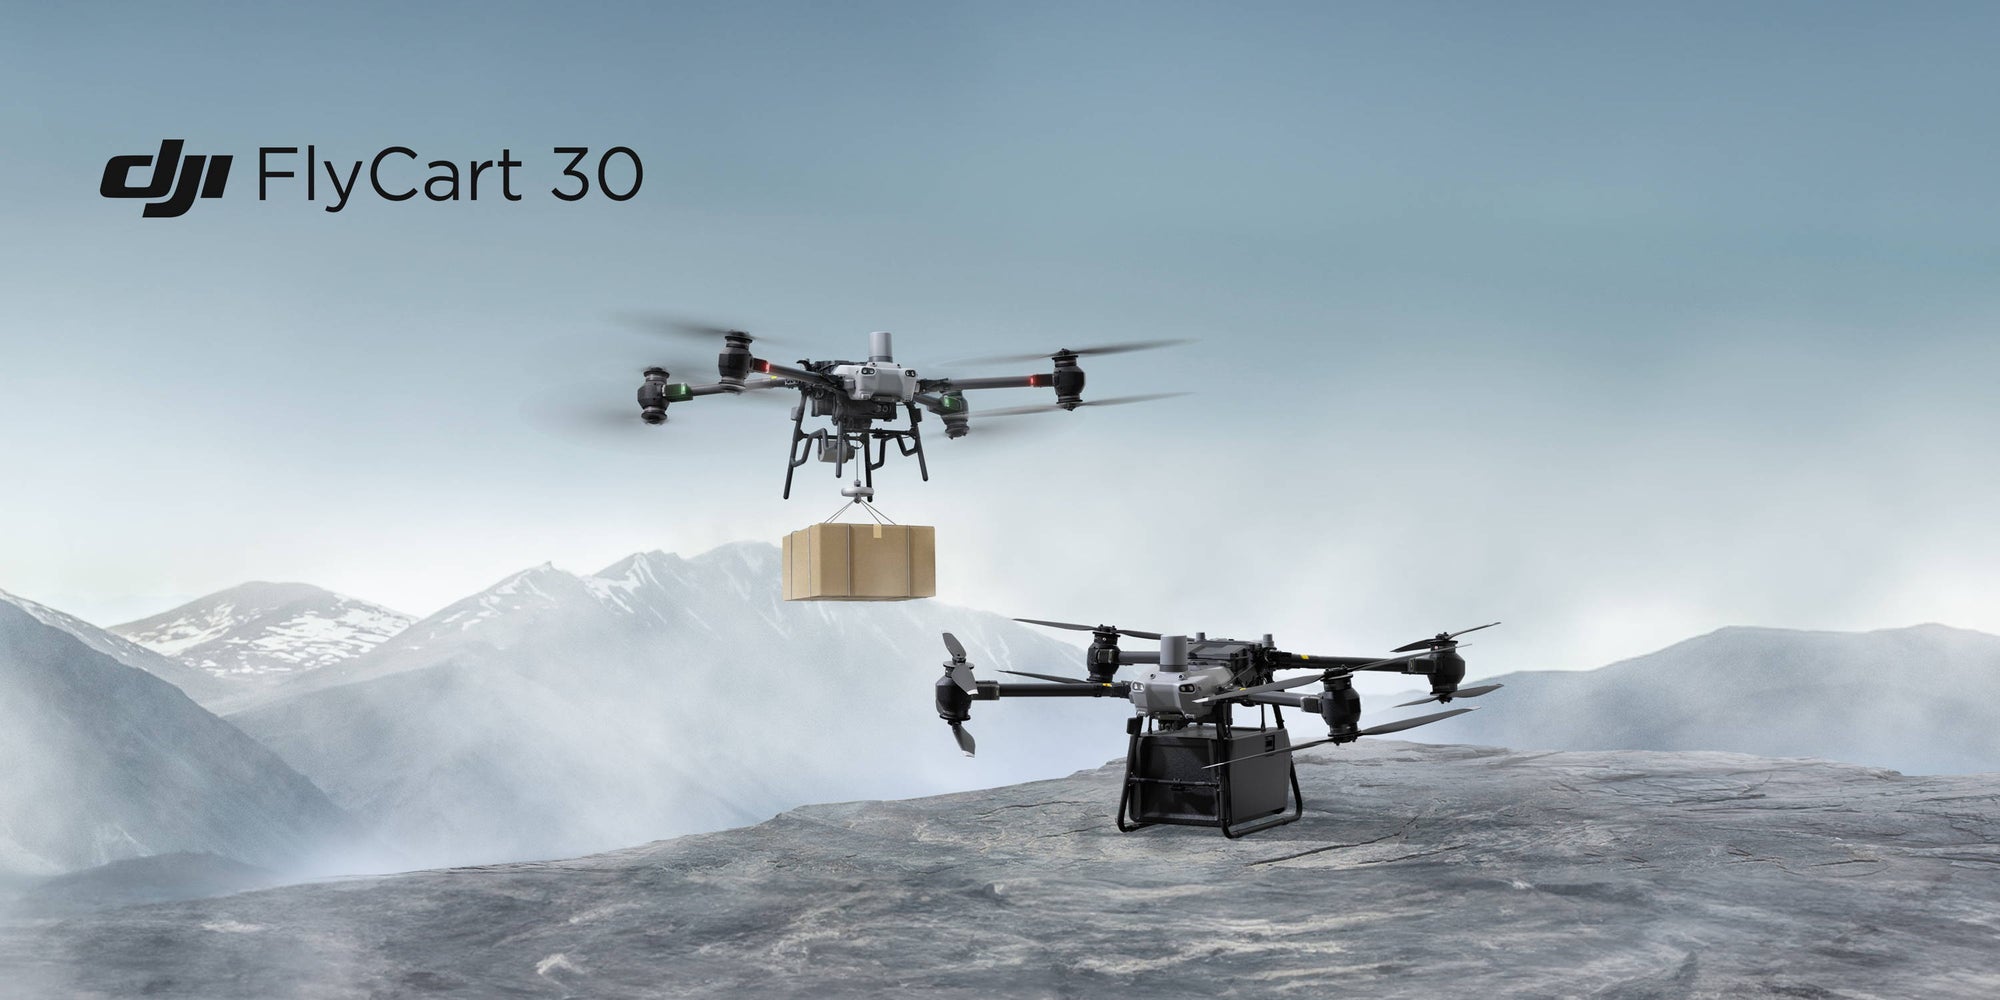 DJI FlyCart 30: Delivery From The Skies